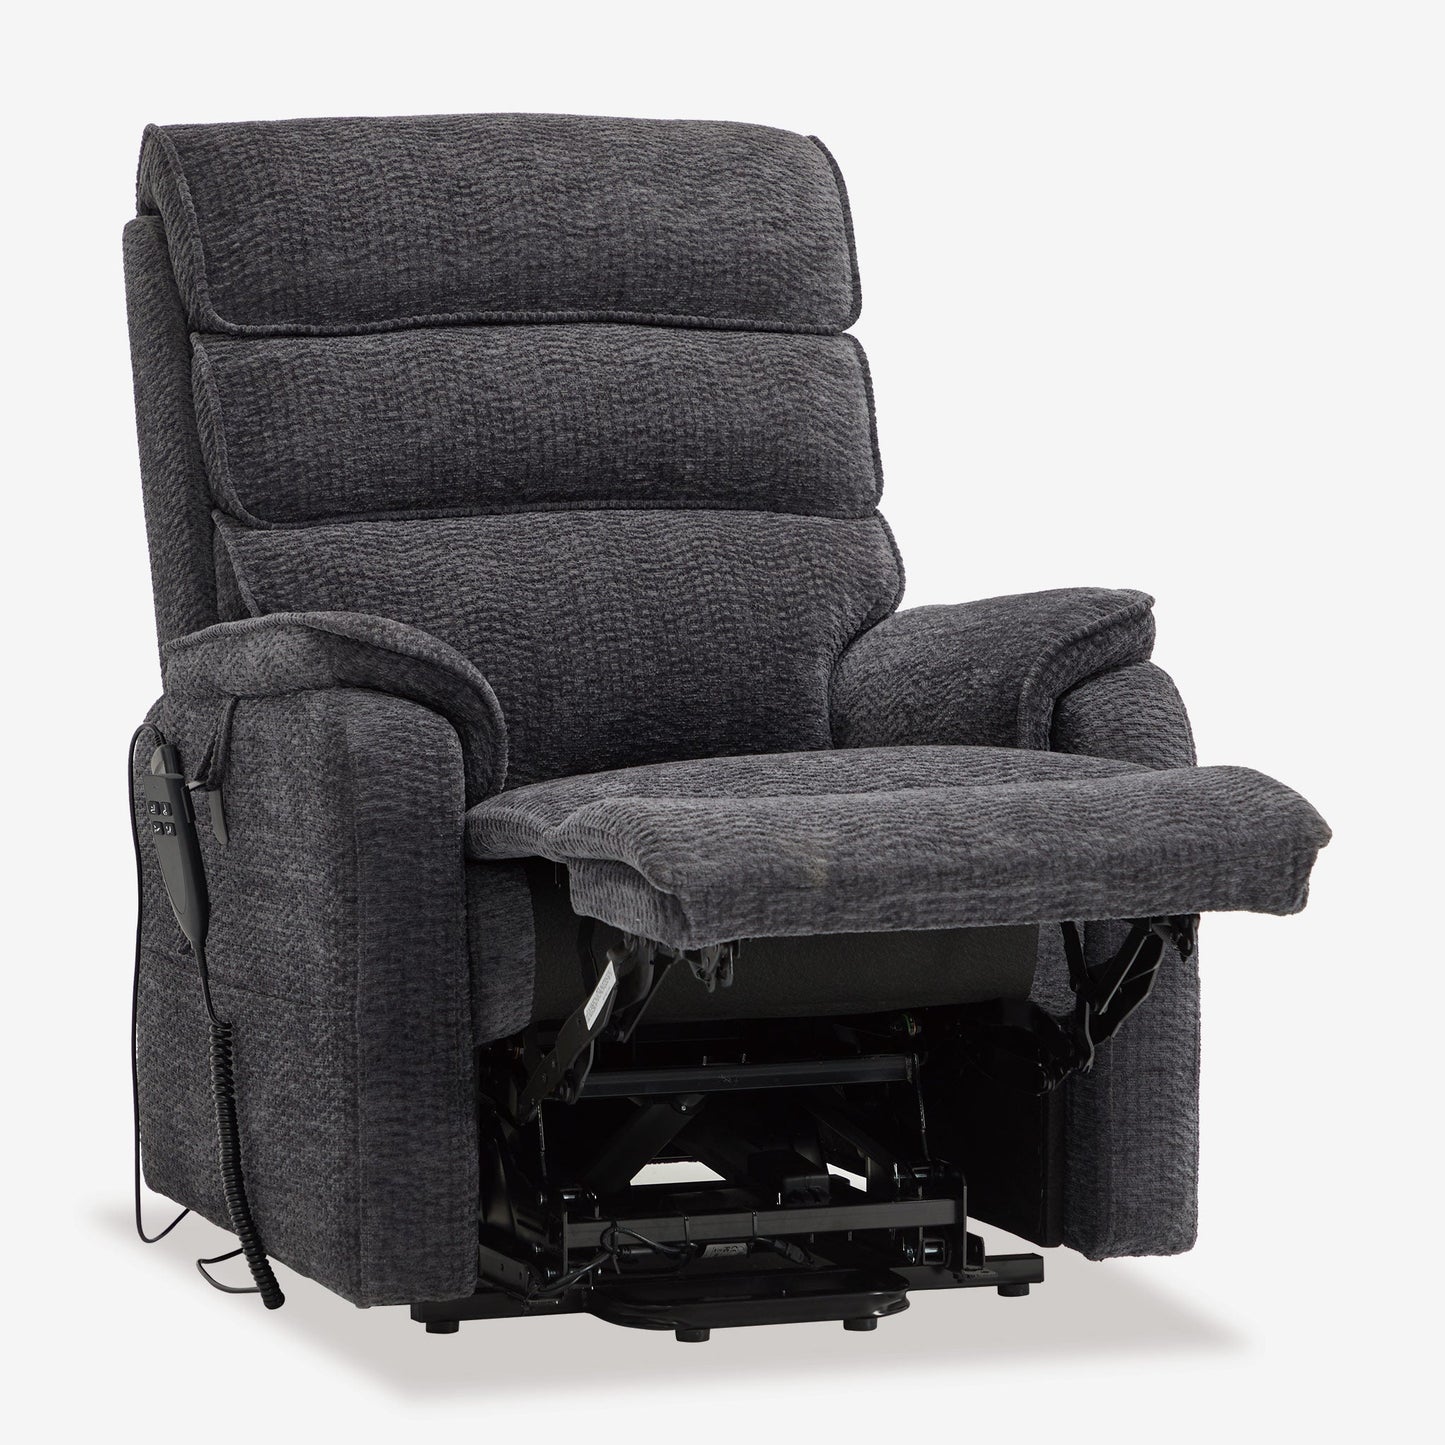 Power Lift Lay Flat Recliner With Infinite Postions And Heat Massage